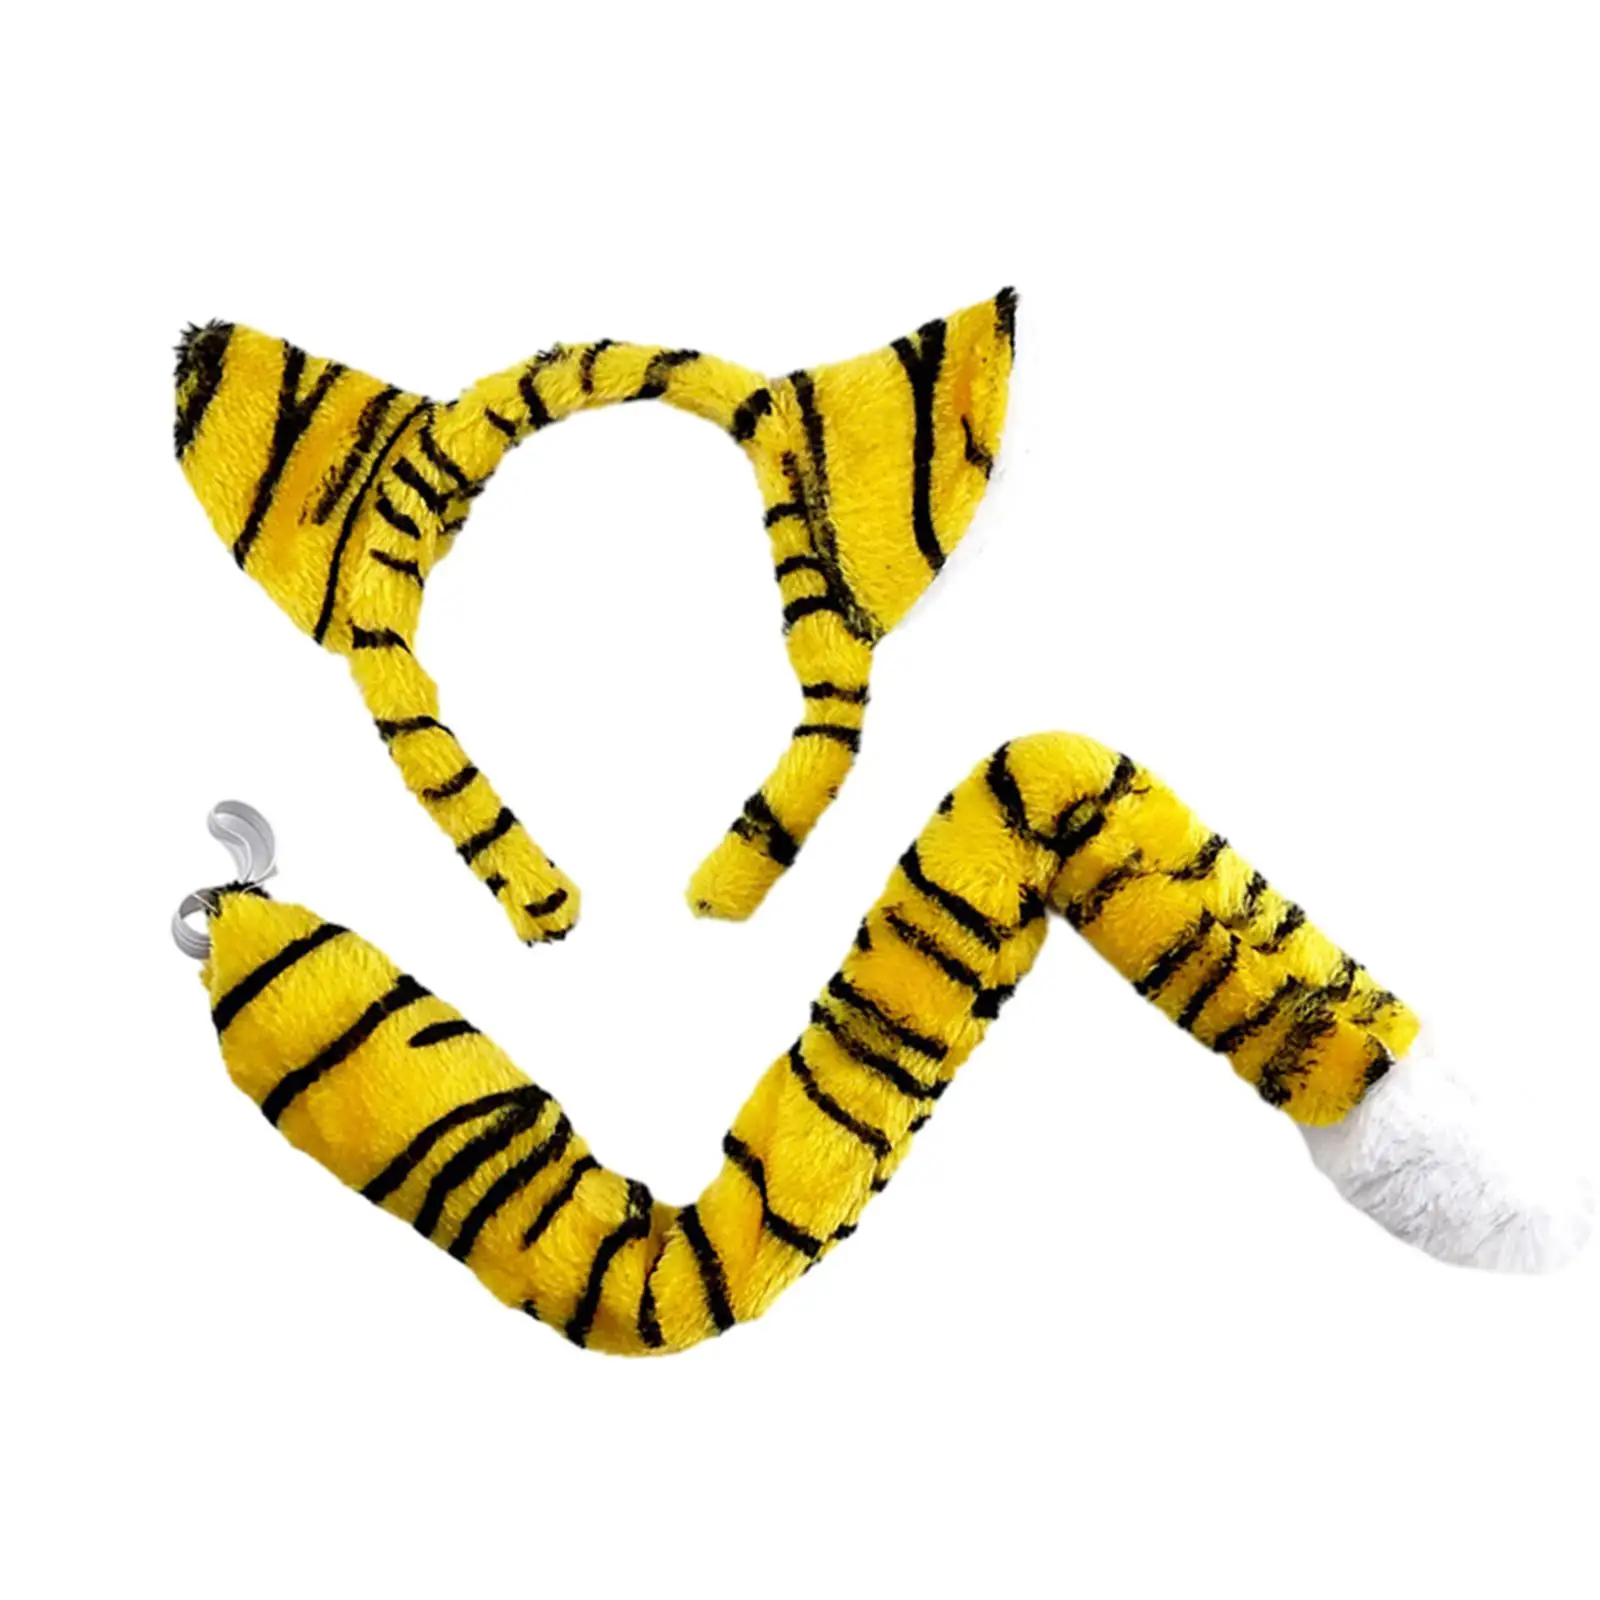 Tiger Ears and Tail Set Ears Headband Fancy Dress Props Cosplay Hair Hoop for Prom Stage Performance Party Birthday Masquerade